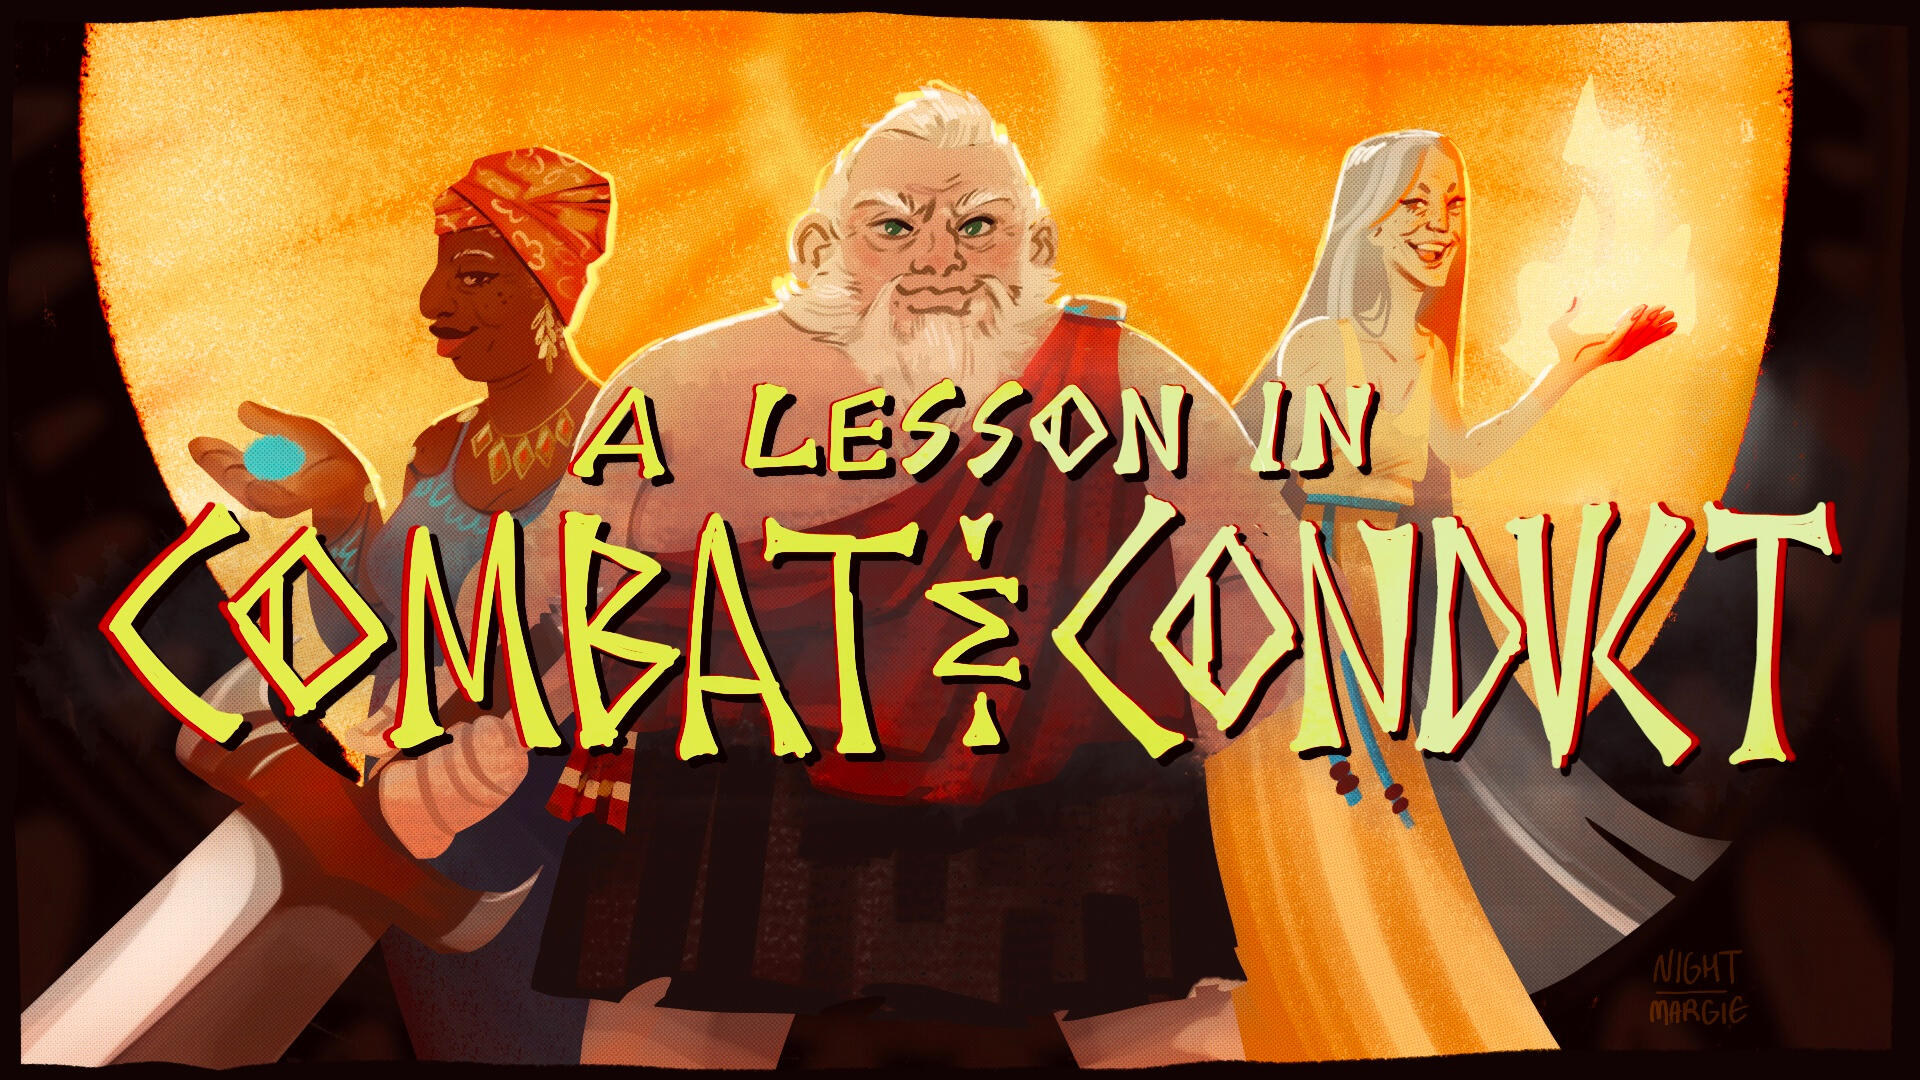 Episode 4 - A Lesson in Combat & Conduct